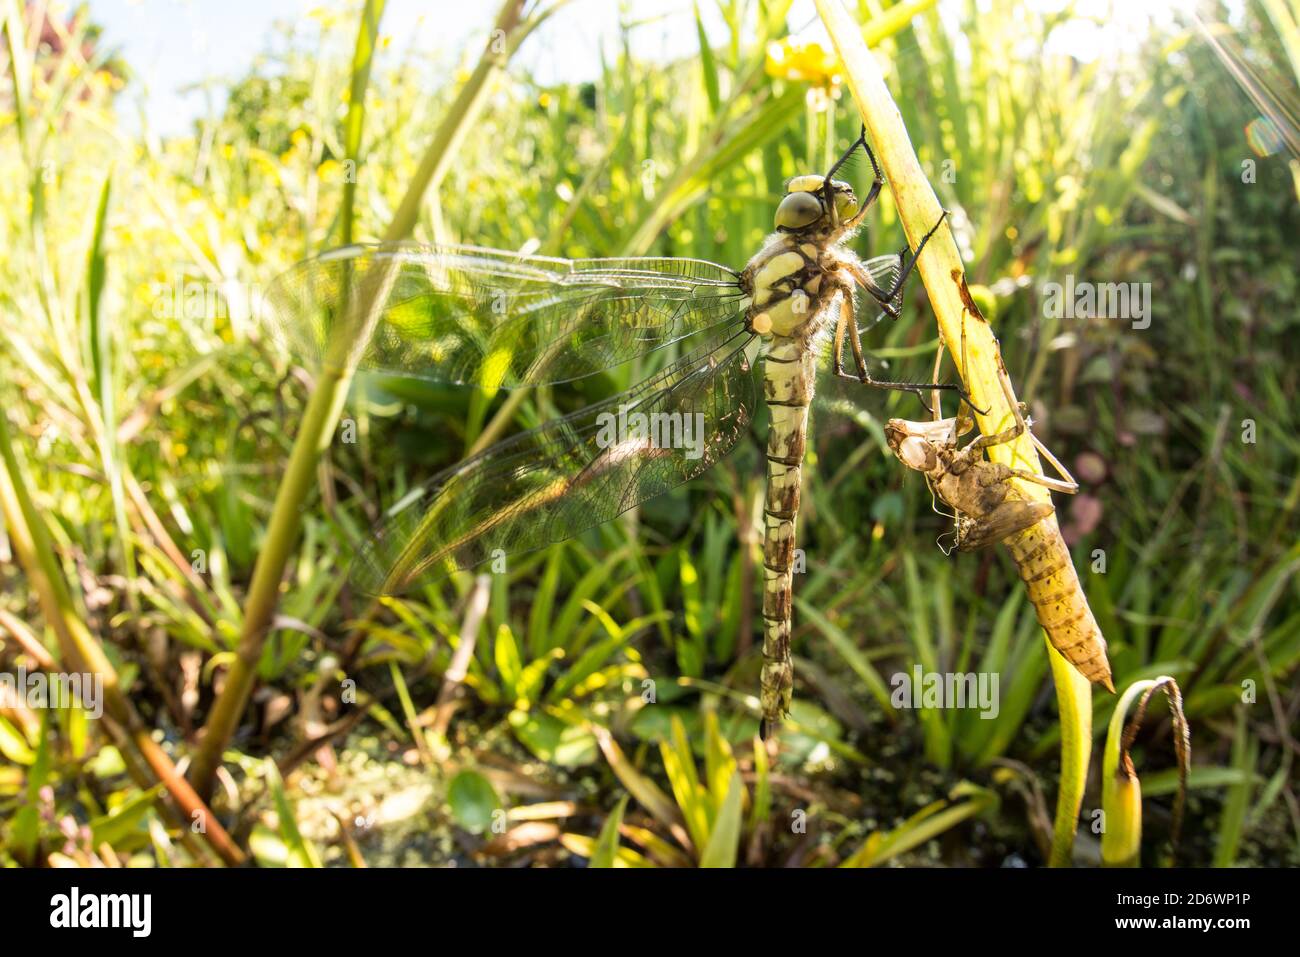 Southern hawker adult emerging from garden pond, UK. Stock Photo